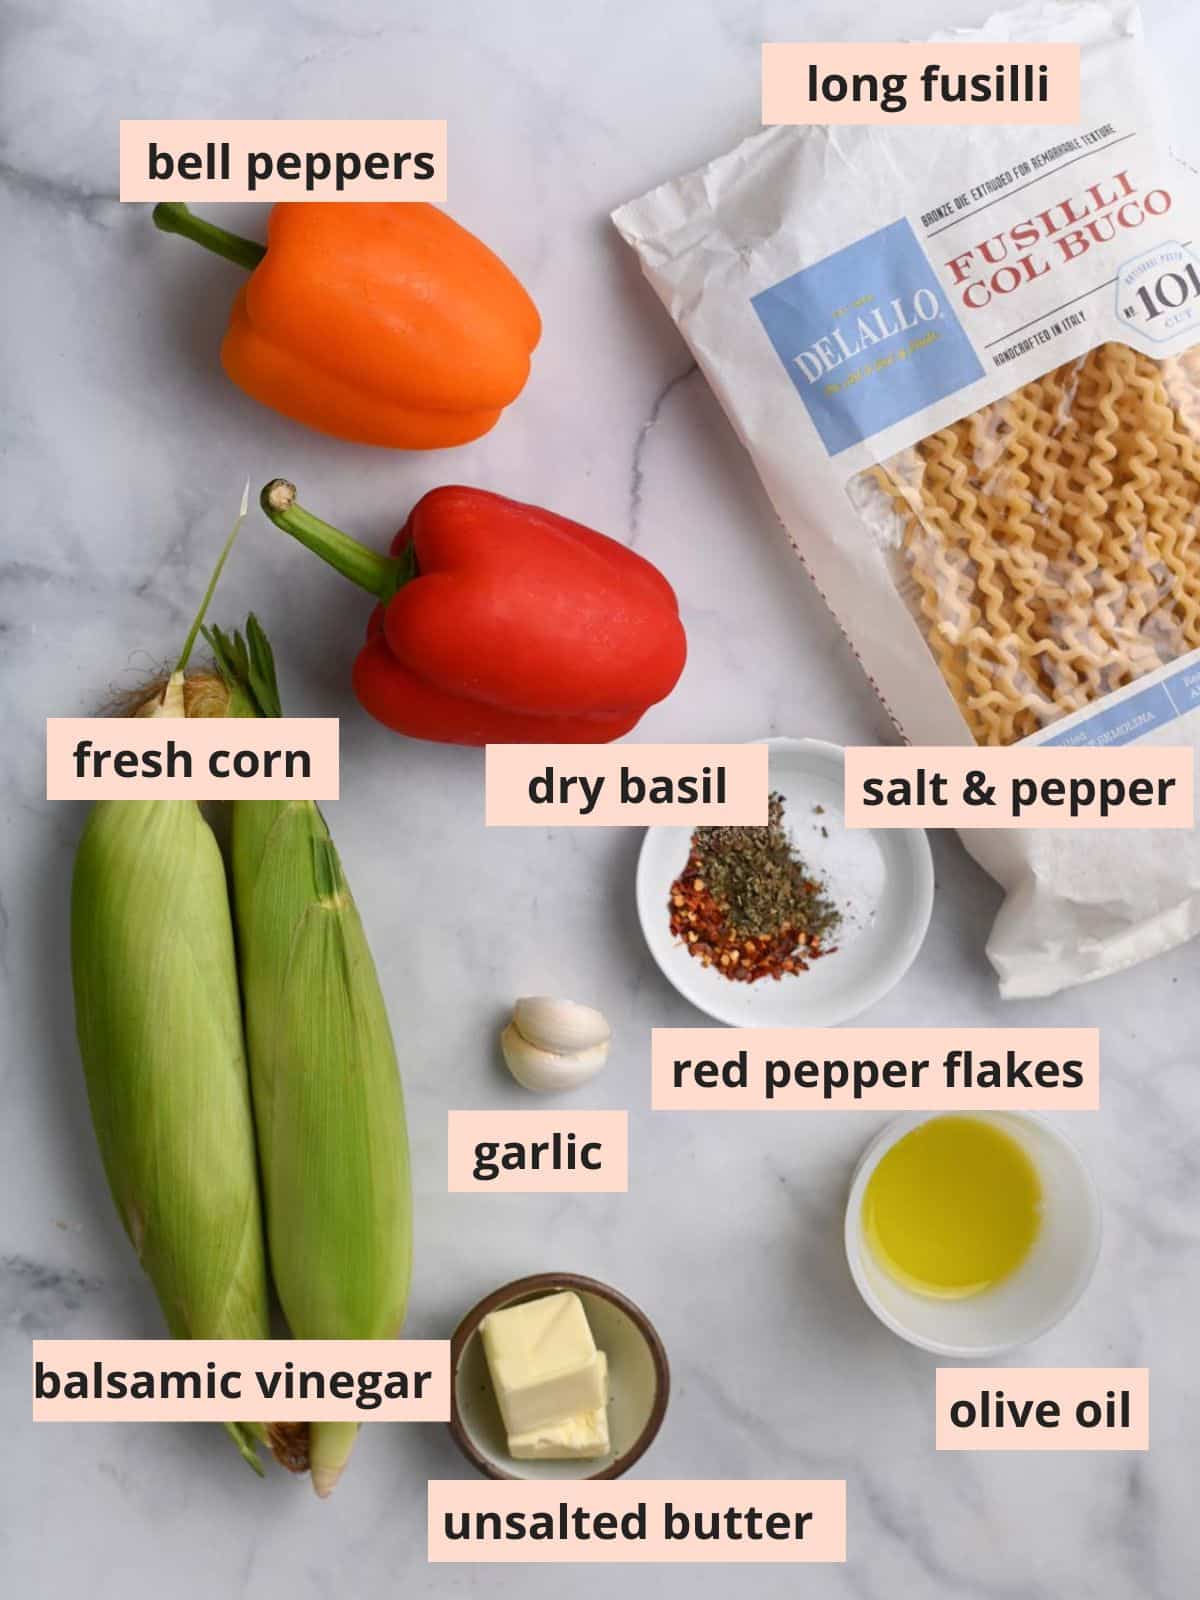 Labeled ingredients used to make bell pepper pasta.